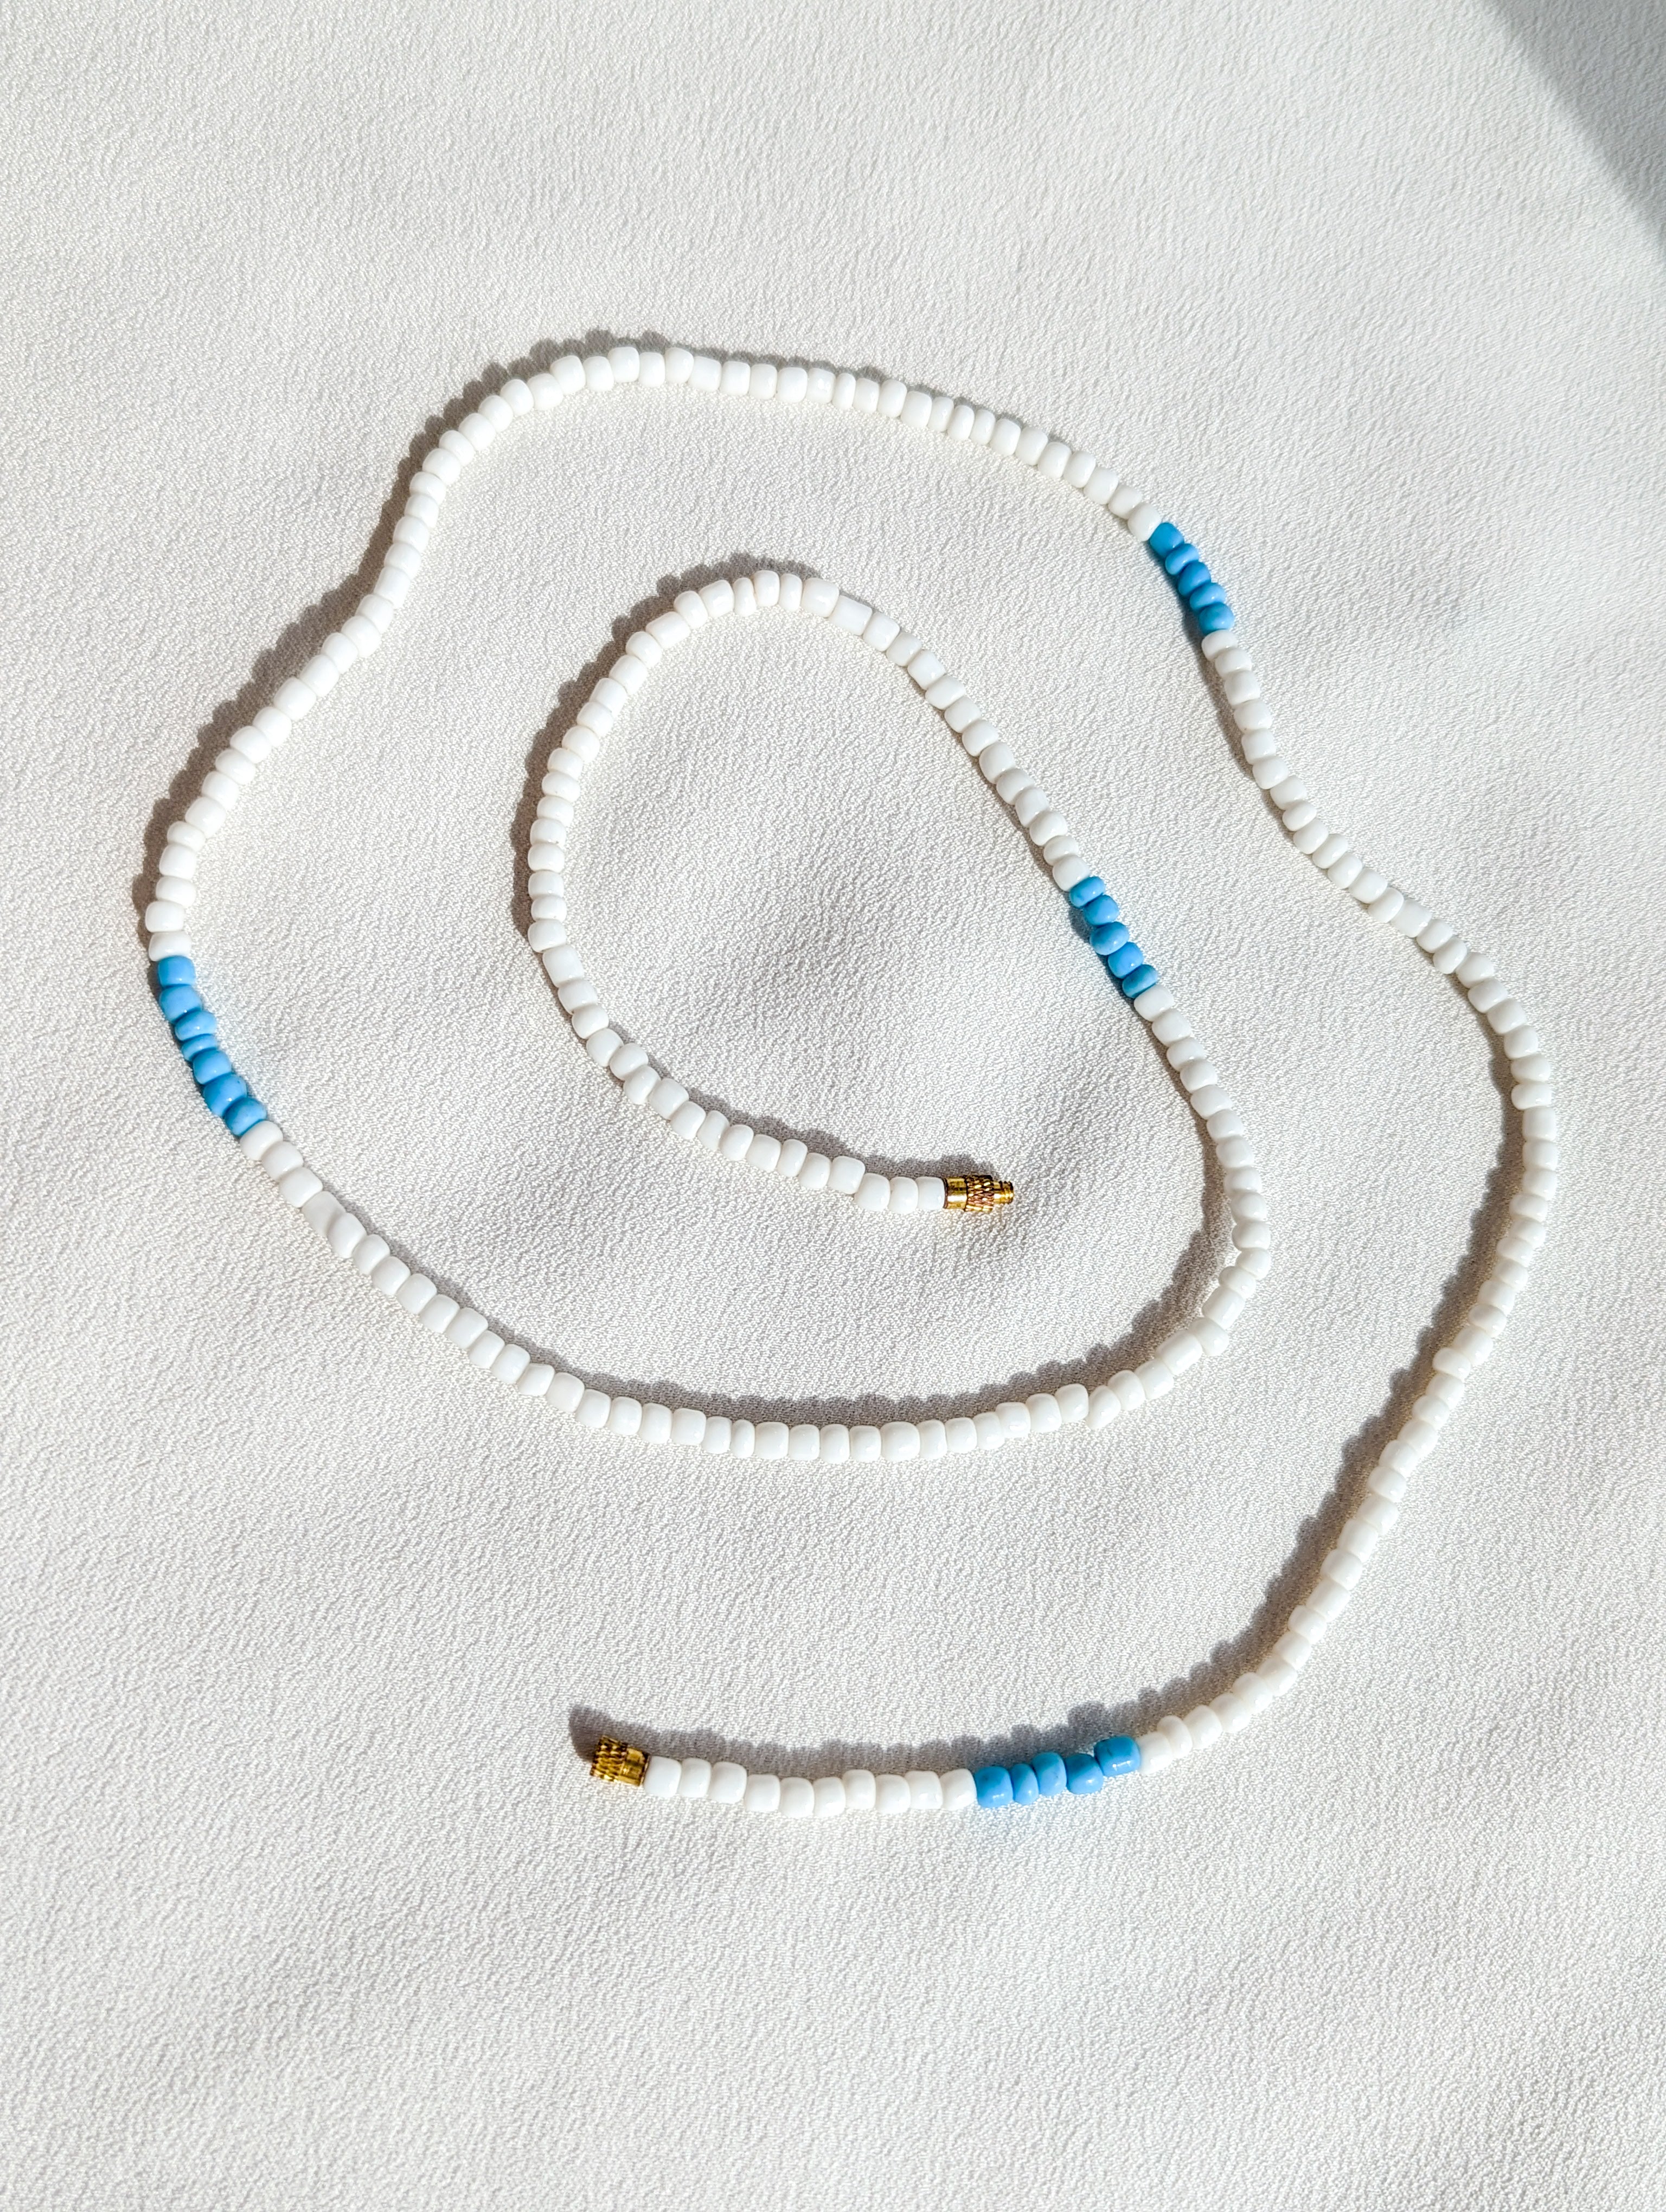 [THE FIFTY FIVE] Belly Chain: White/Blue [Large Beads]